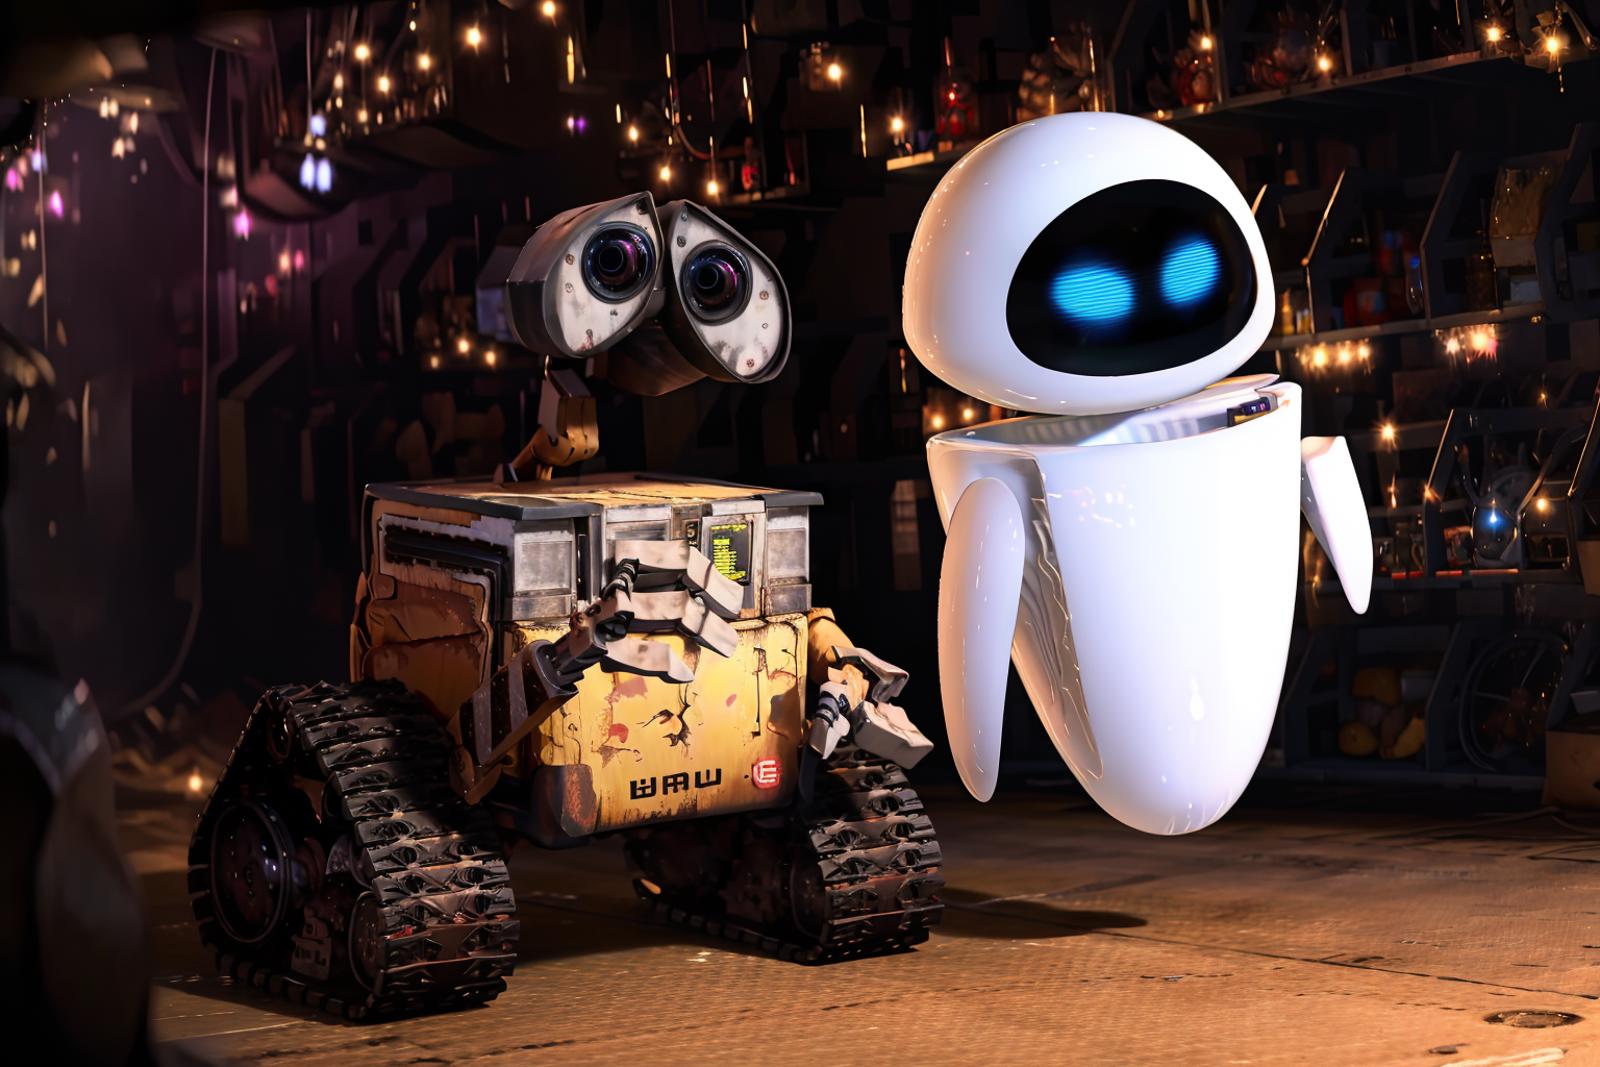 A Scary Robot and a Cute Robot in a Movie Theater.